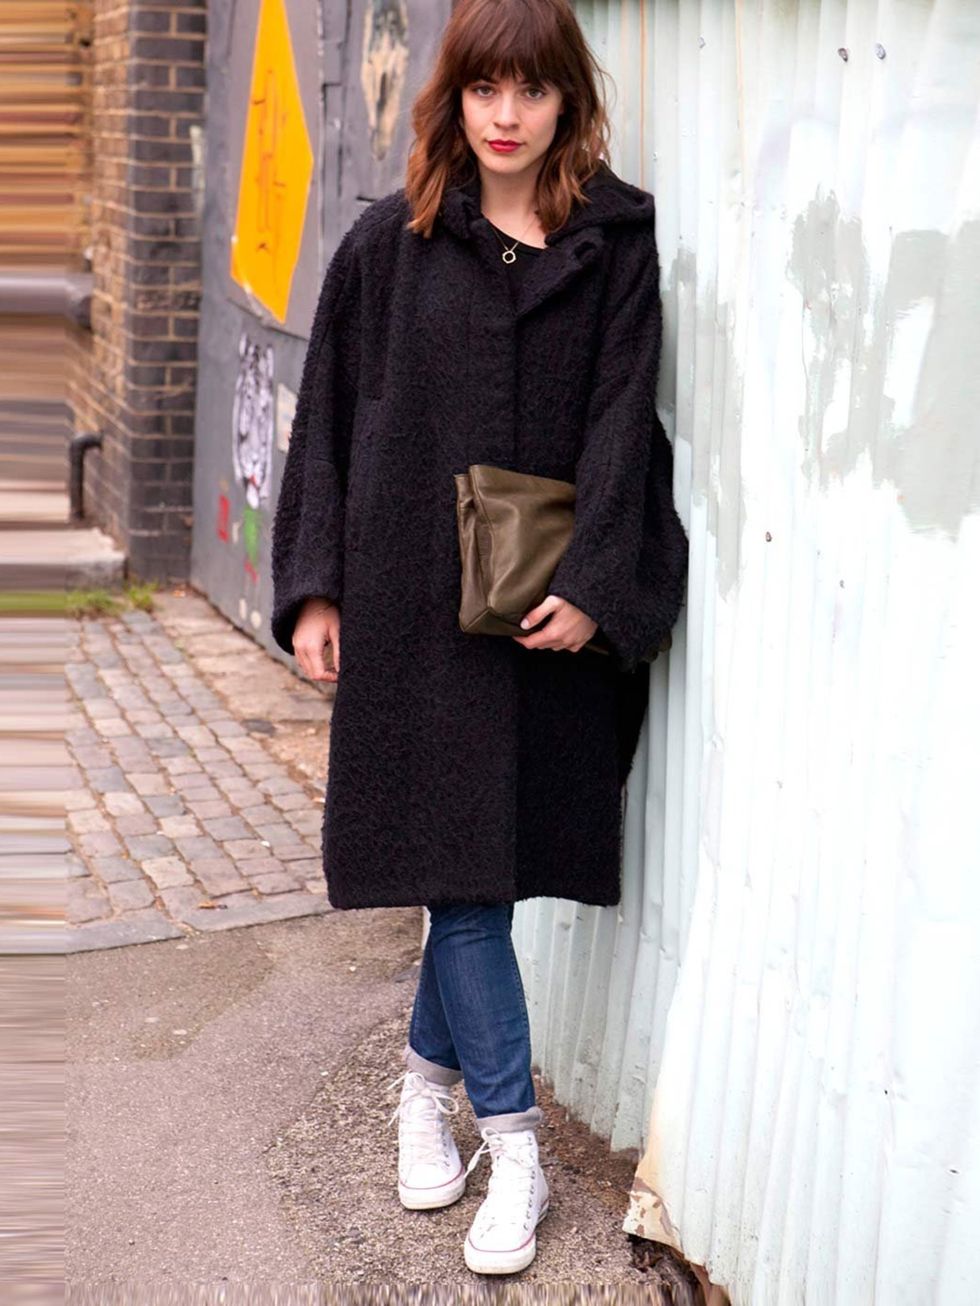 <p>Kate, 27, Assistant Buyer.Acne coat, Cos jeans and bag, Converse trainers.</p>